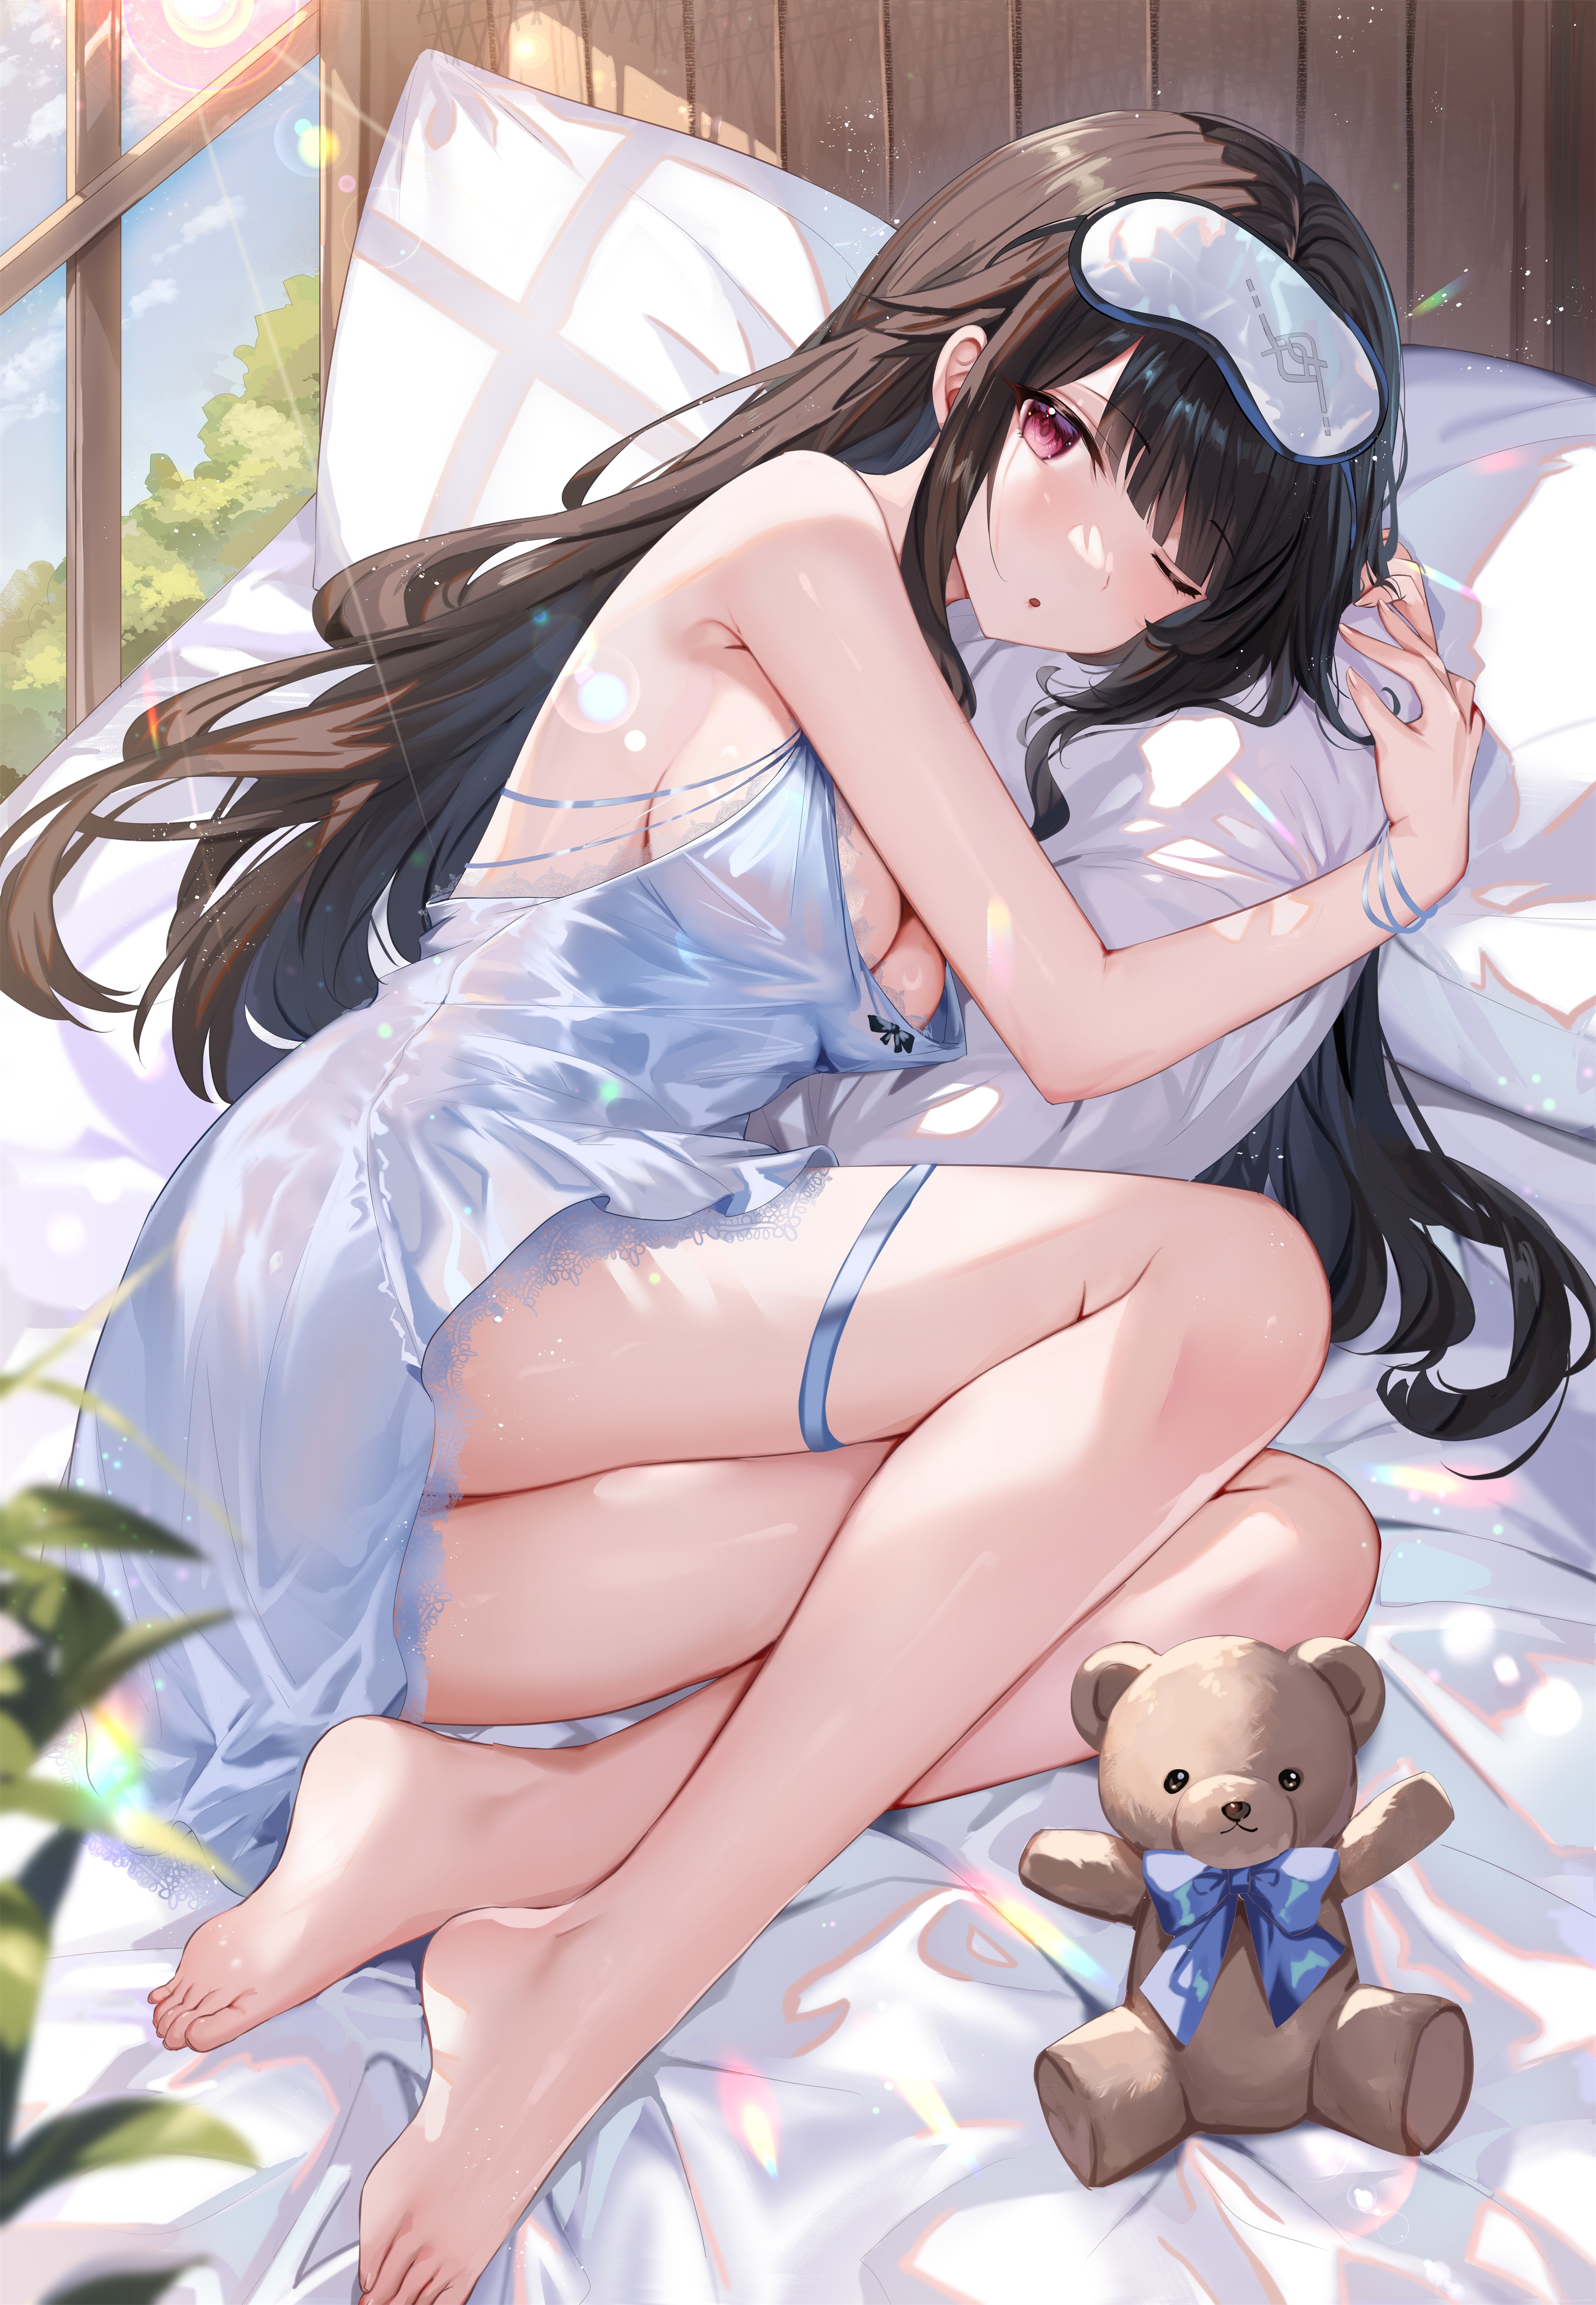 Anime 3372x4869 anime anime girls Gejigejier portrait display lying down lying on side looking at viewer long hair one eye closed teddy bears bent legs sideboob big boobs sunlight in bed pillow leaves sleep mask blue bow bow tie leg ring bed Snowbreak: Containment Zone Yao (Snowbreak) bracelets pointed toes foot sole wood backless backless dress dress